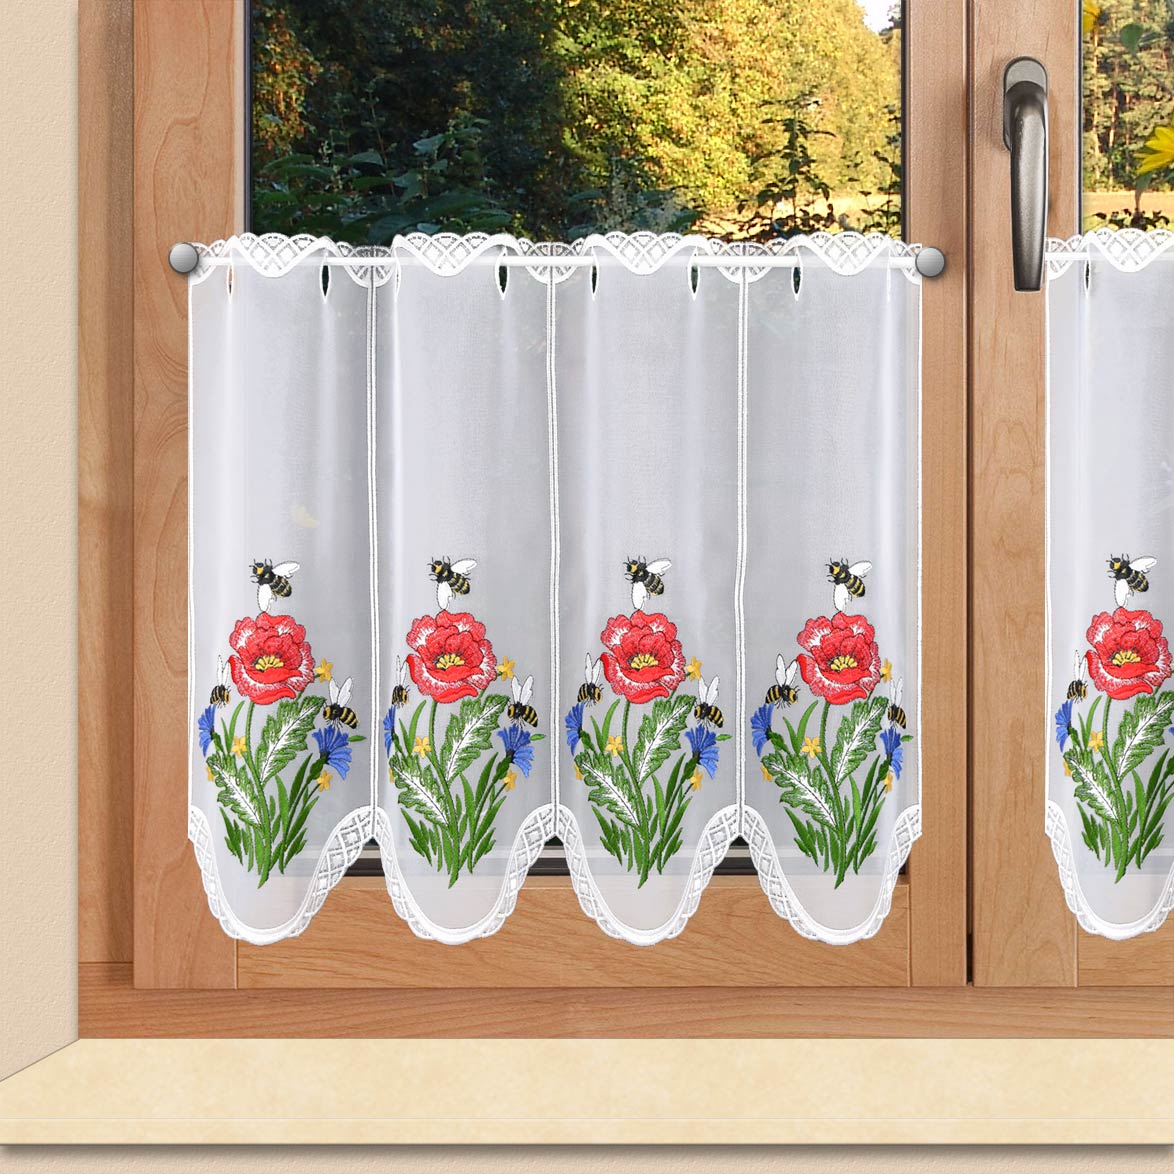 a window with white curtains and flowers